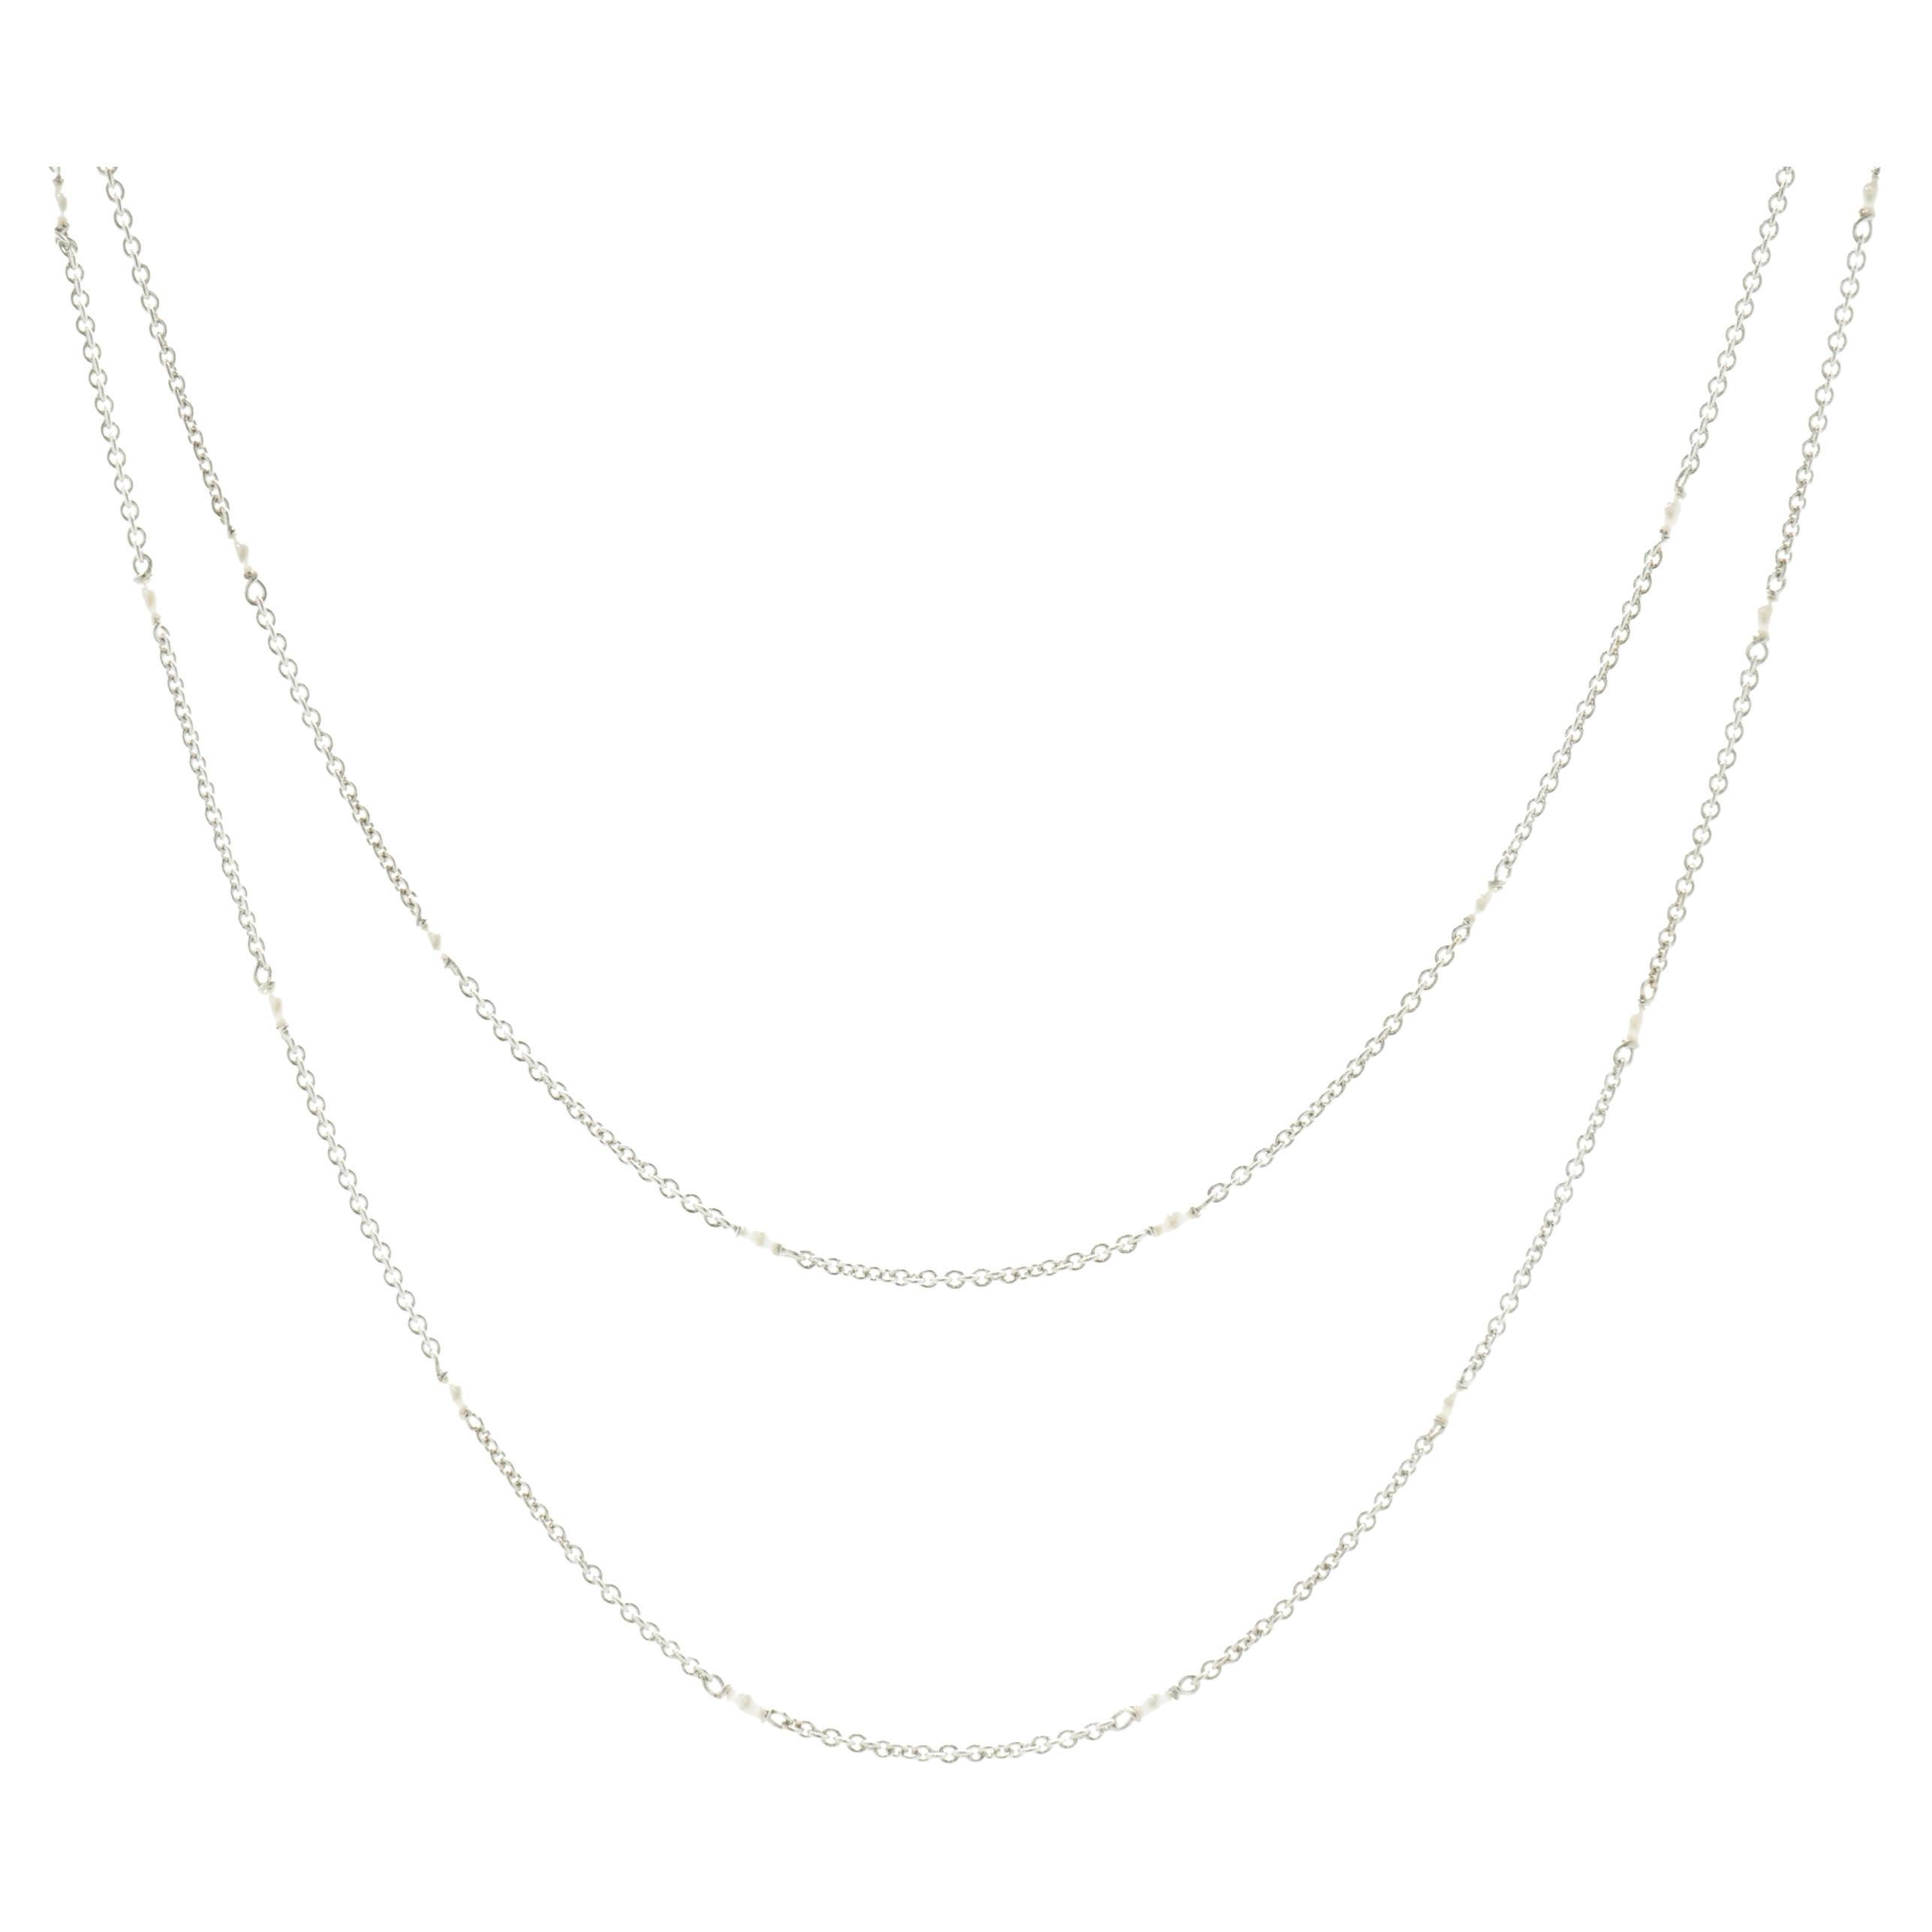 18 Karat White Gold Seed Pearl Station Necklace